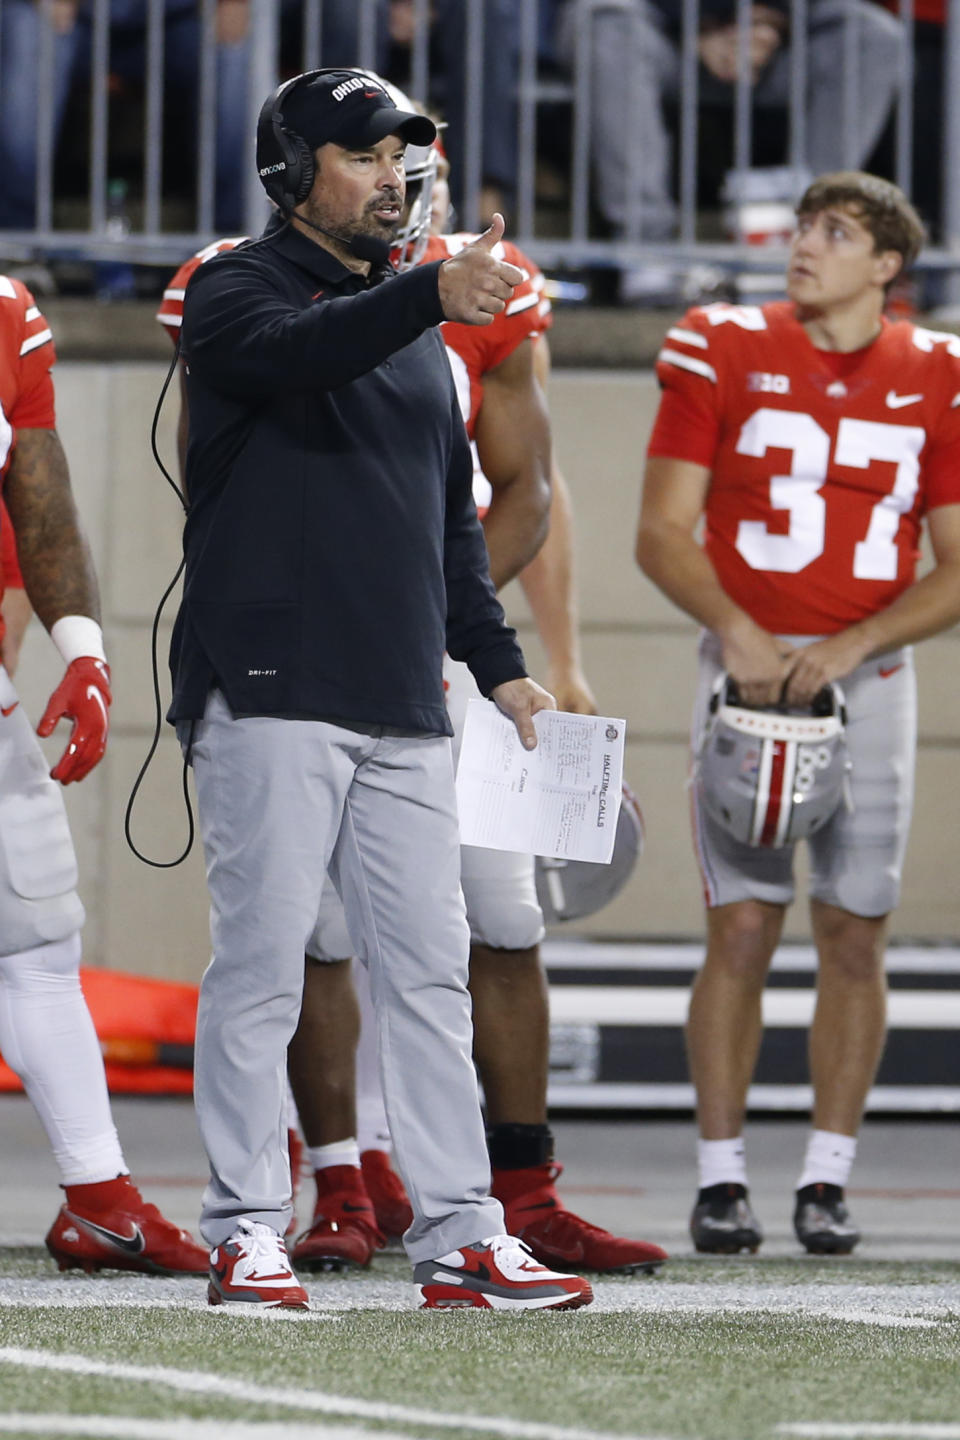 Ohio State head coach Ryan Day signals to his team during the second half of an NCAA college football game against Akron, Saturday, Sept. 25, 2021, in Columbus, Ohio. (AP Photo/Jay LaPrete)